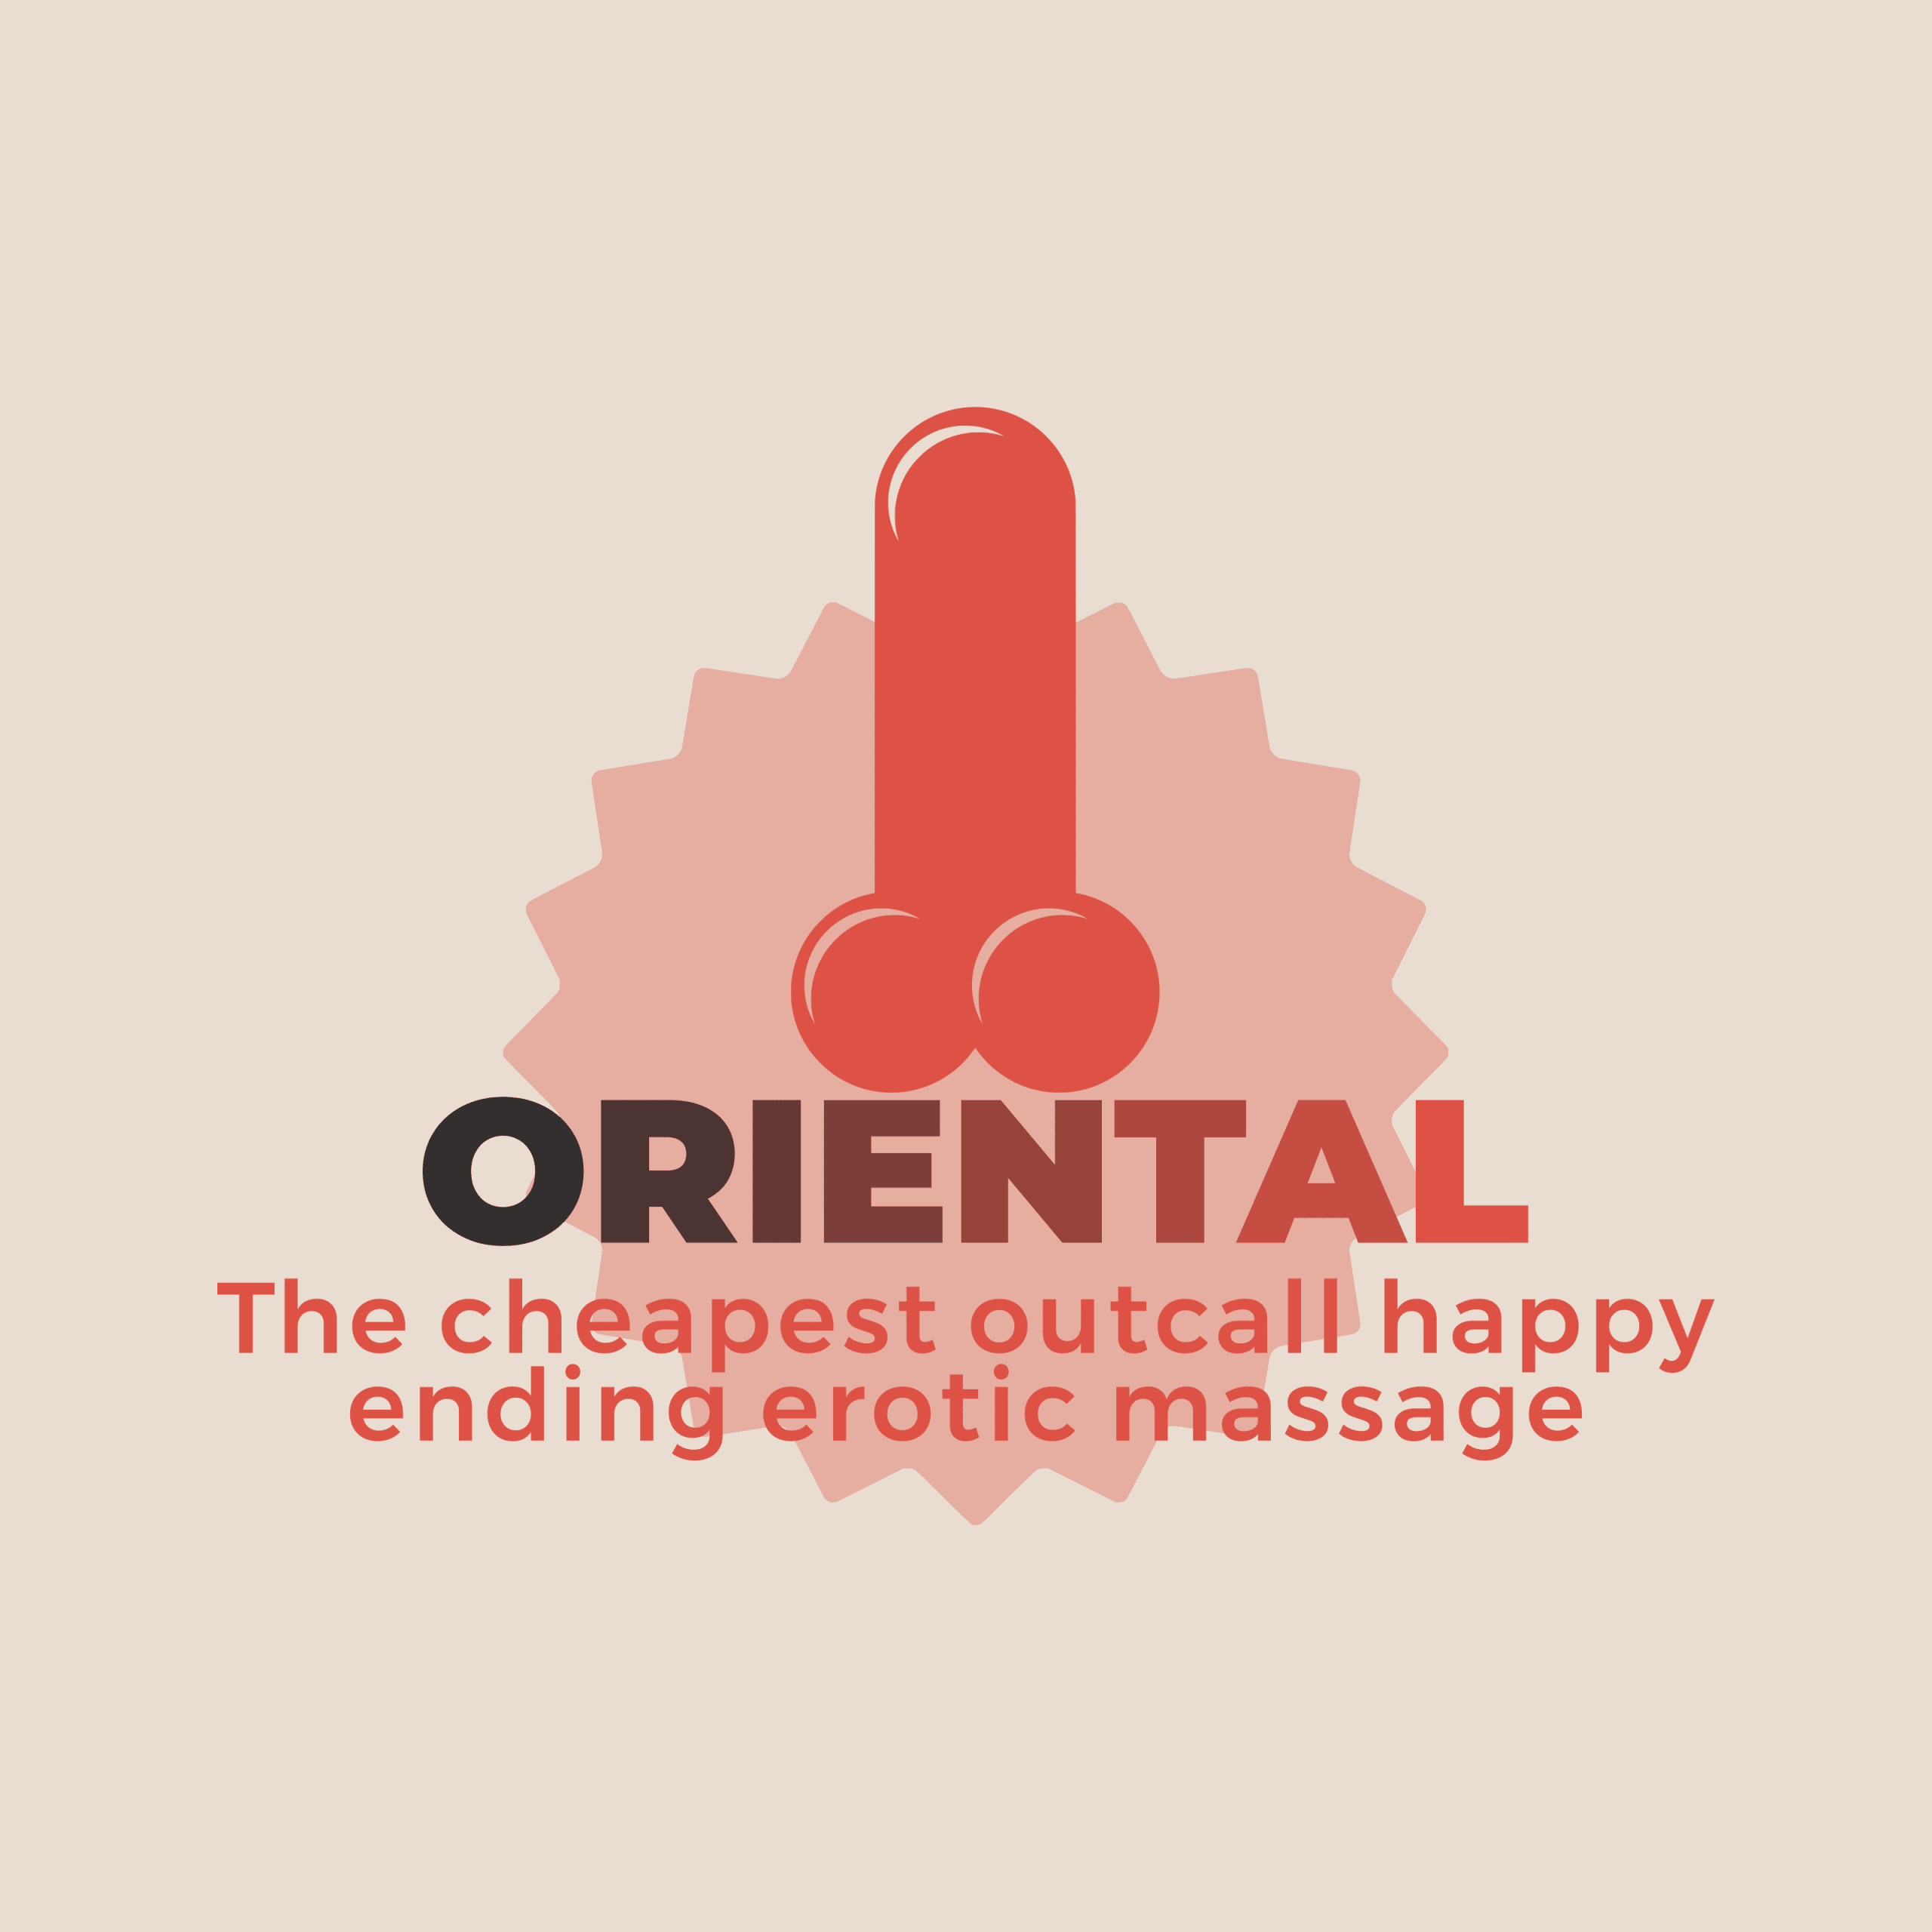 The cheapest outcall happy ending massage in Tokyo. 【ORIENTAL】